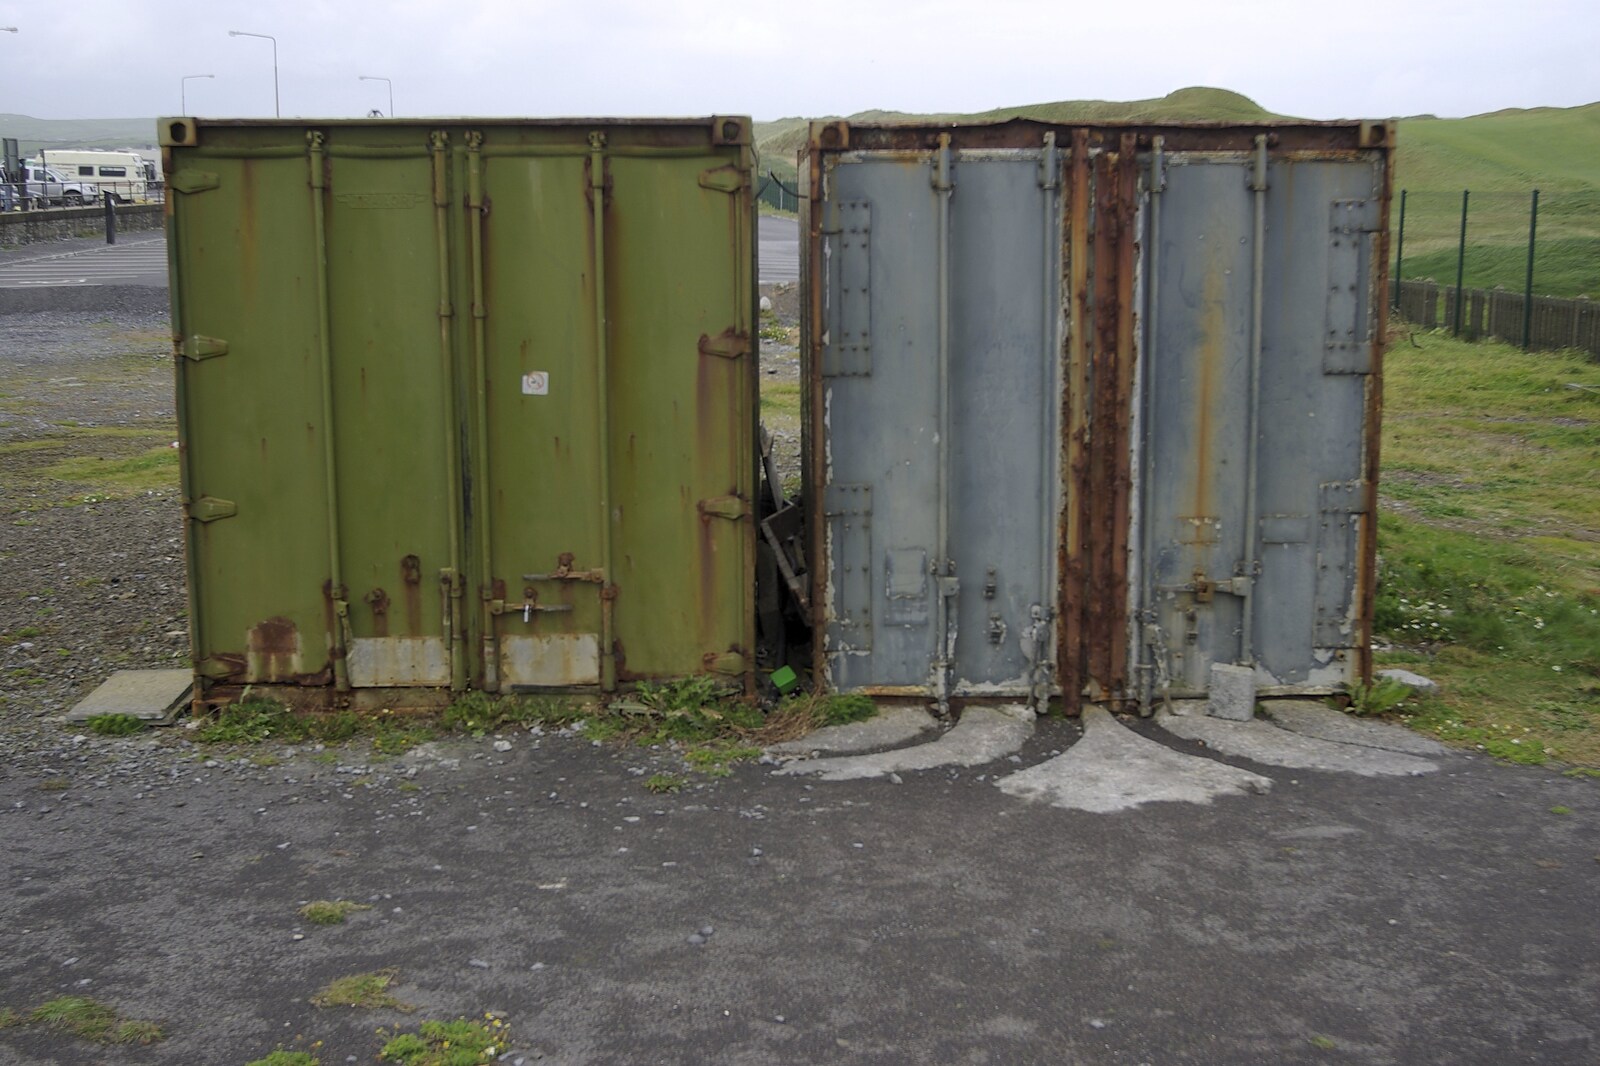 Kilkee to Galway, Connacht, Ireland - 23rd September 2007: Some derelict containers